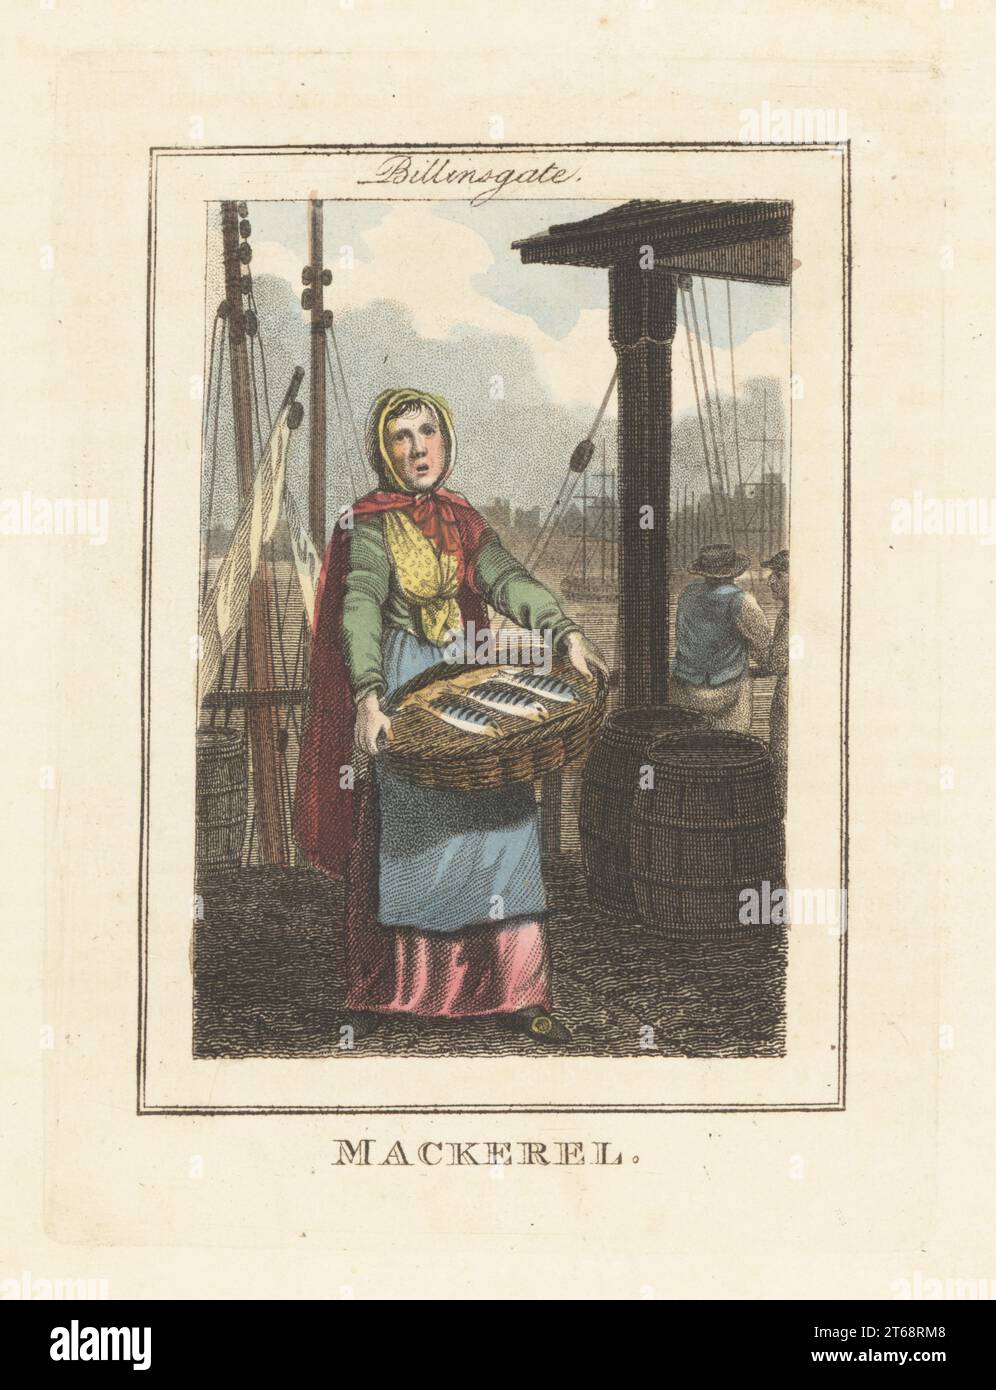 Fishwife selling mackerel at Billingsgate Market, London, 1805. In scarf, cloak, skirt and apron with basket of fresh mackerel. In front of fishing boats, masts and sails, barrels of salt fish on the docks. Handcoloured copperplate engraving by Edward Edwards after an illustration by William Marshall Craig from Description of the Plates Representing the Itinerant Traders of London, Richard Phillips, No. 71 St Pauls Churchyard, London, 1805. Stock Photo